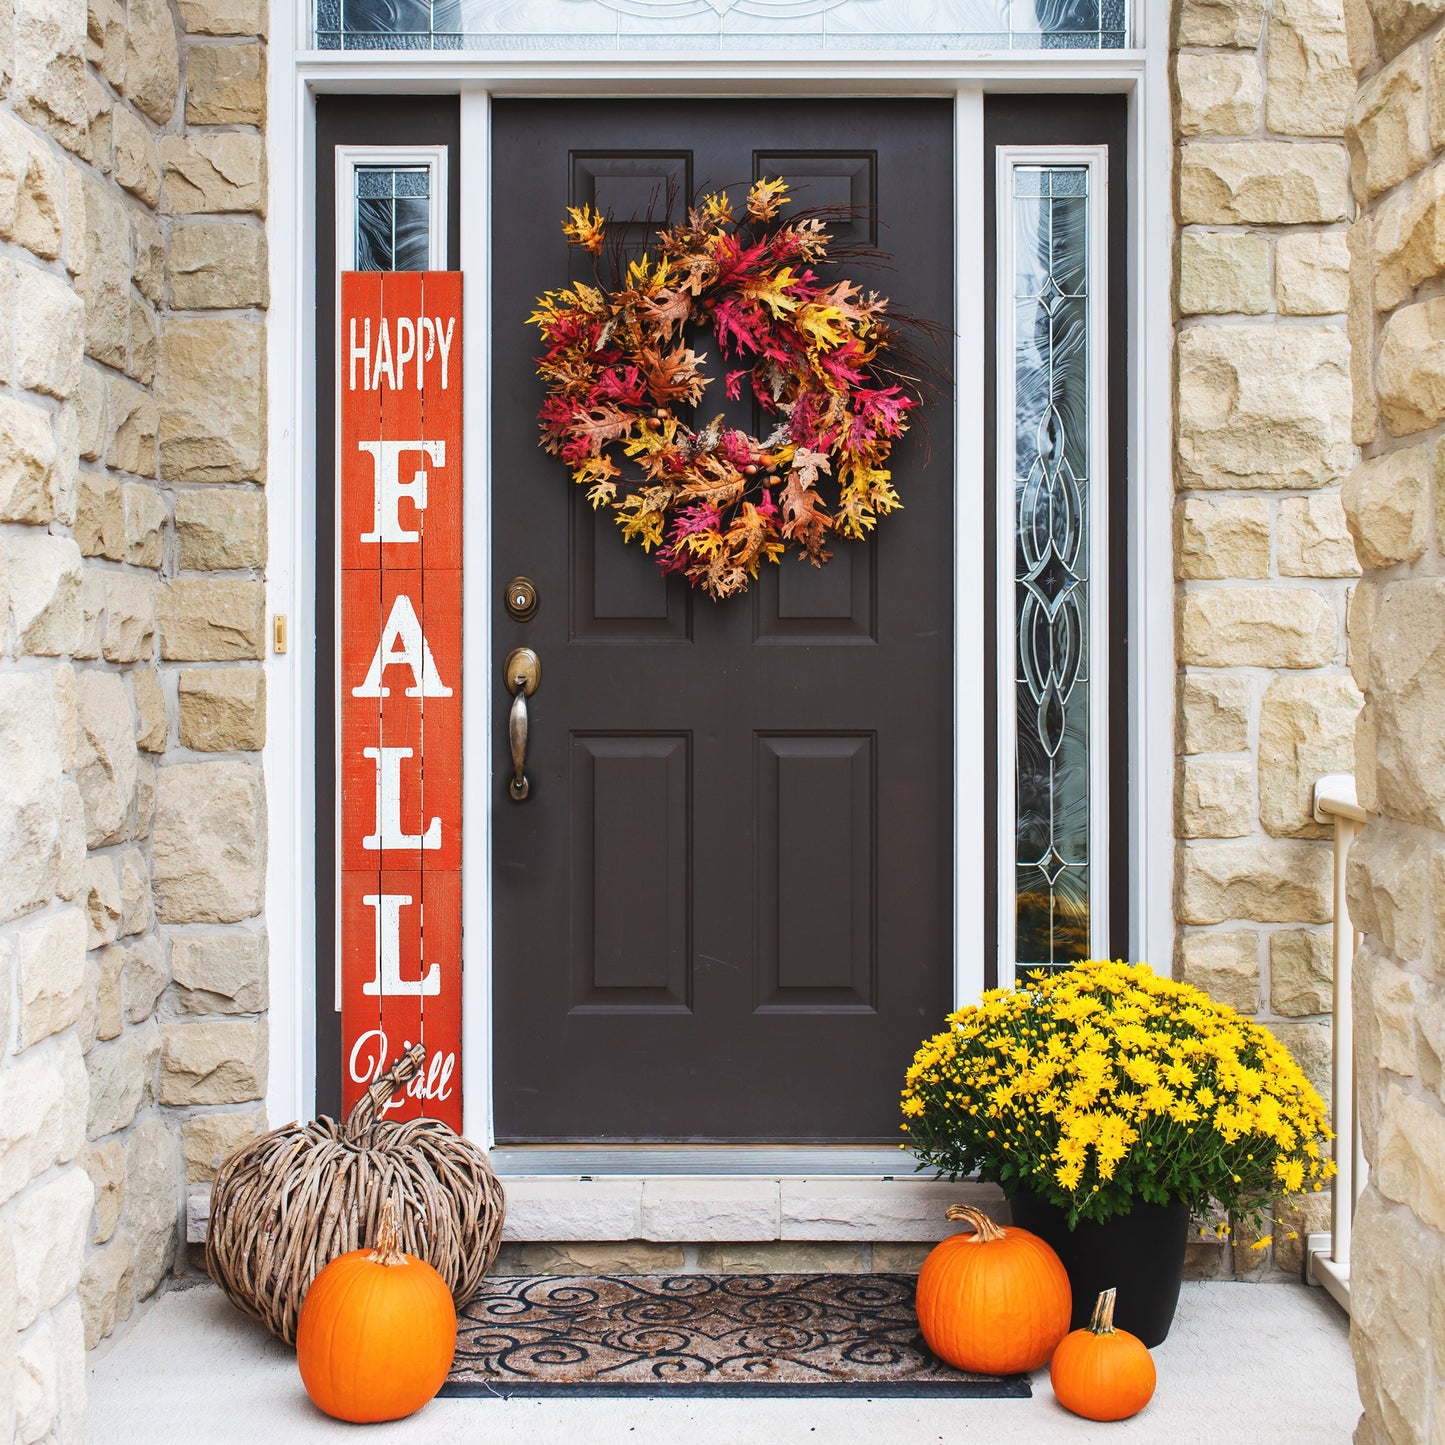 72in Outdoor Happy Fall Y'all Rustic Craft Porch Sign for Front Door, 6ft Vertical Wooden Welcome Sign for Front Porch